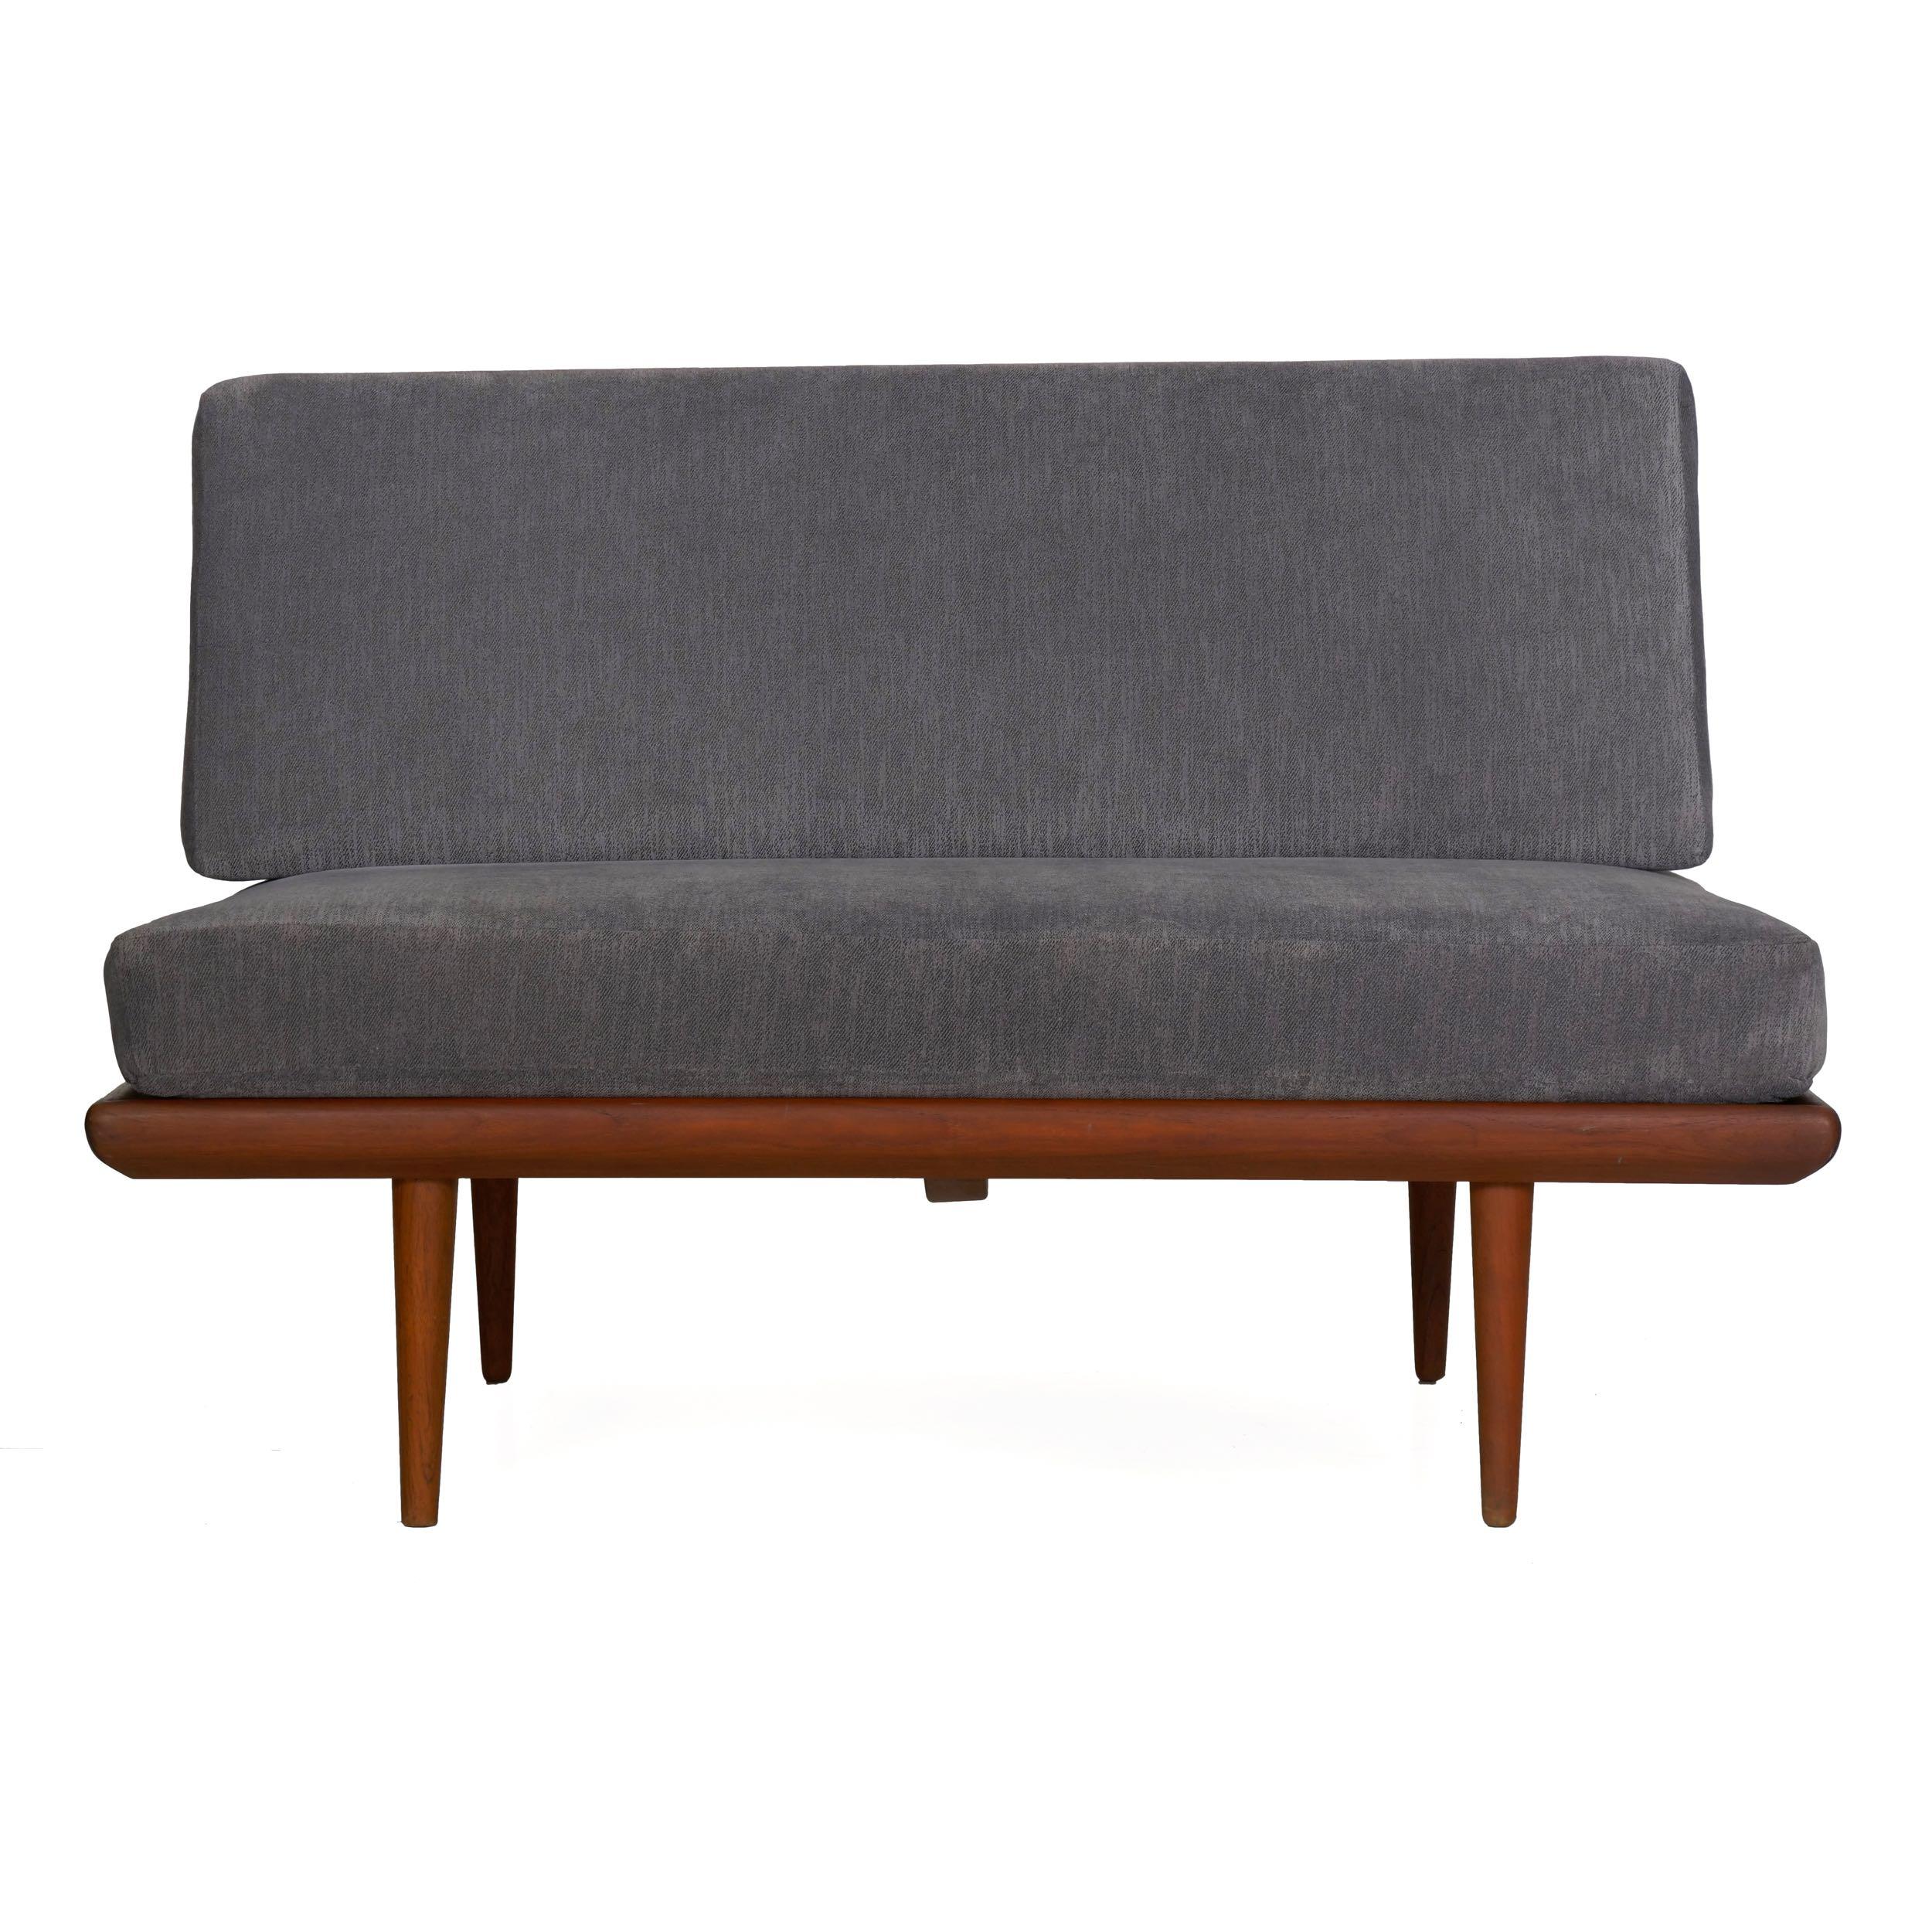 Designed in the 1960s by Peter Hvidt and Orla Mørlgaard-Nielsen for production by France & Sons of Denmark, this sleek and streamlined two-seat daybed loveseat is executed in thick solid teak. An unusual and distinctive form, iron brackets rise from